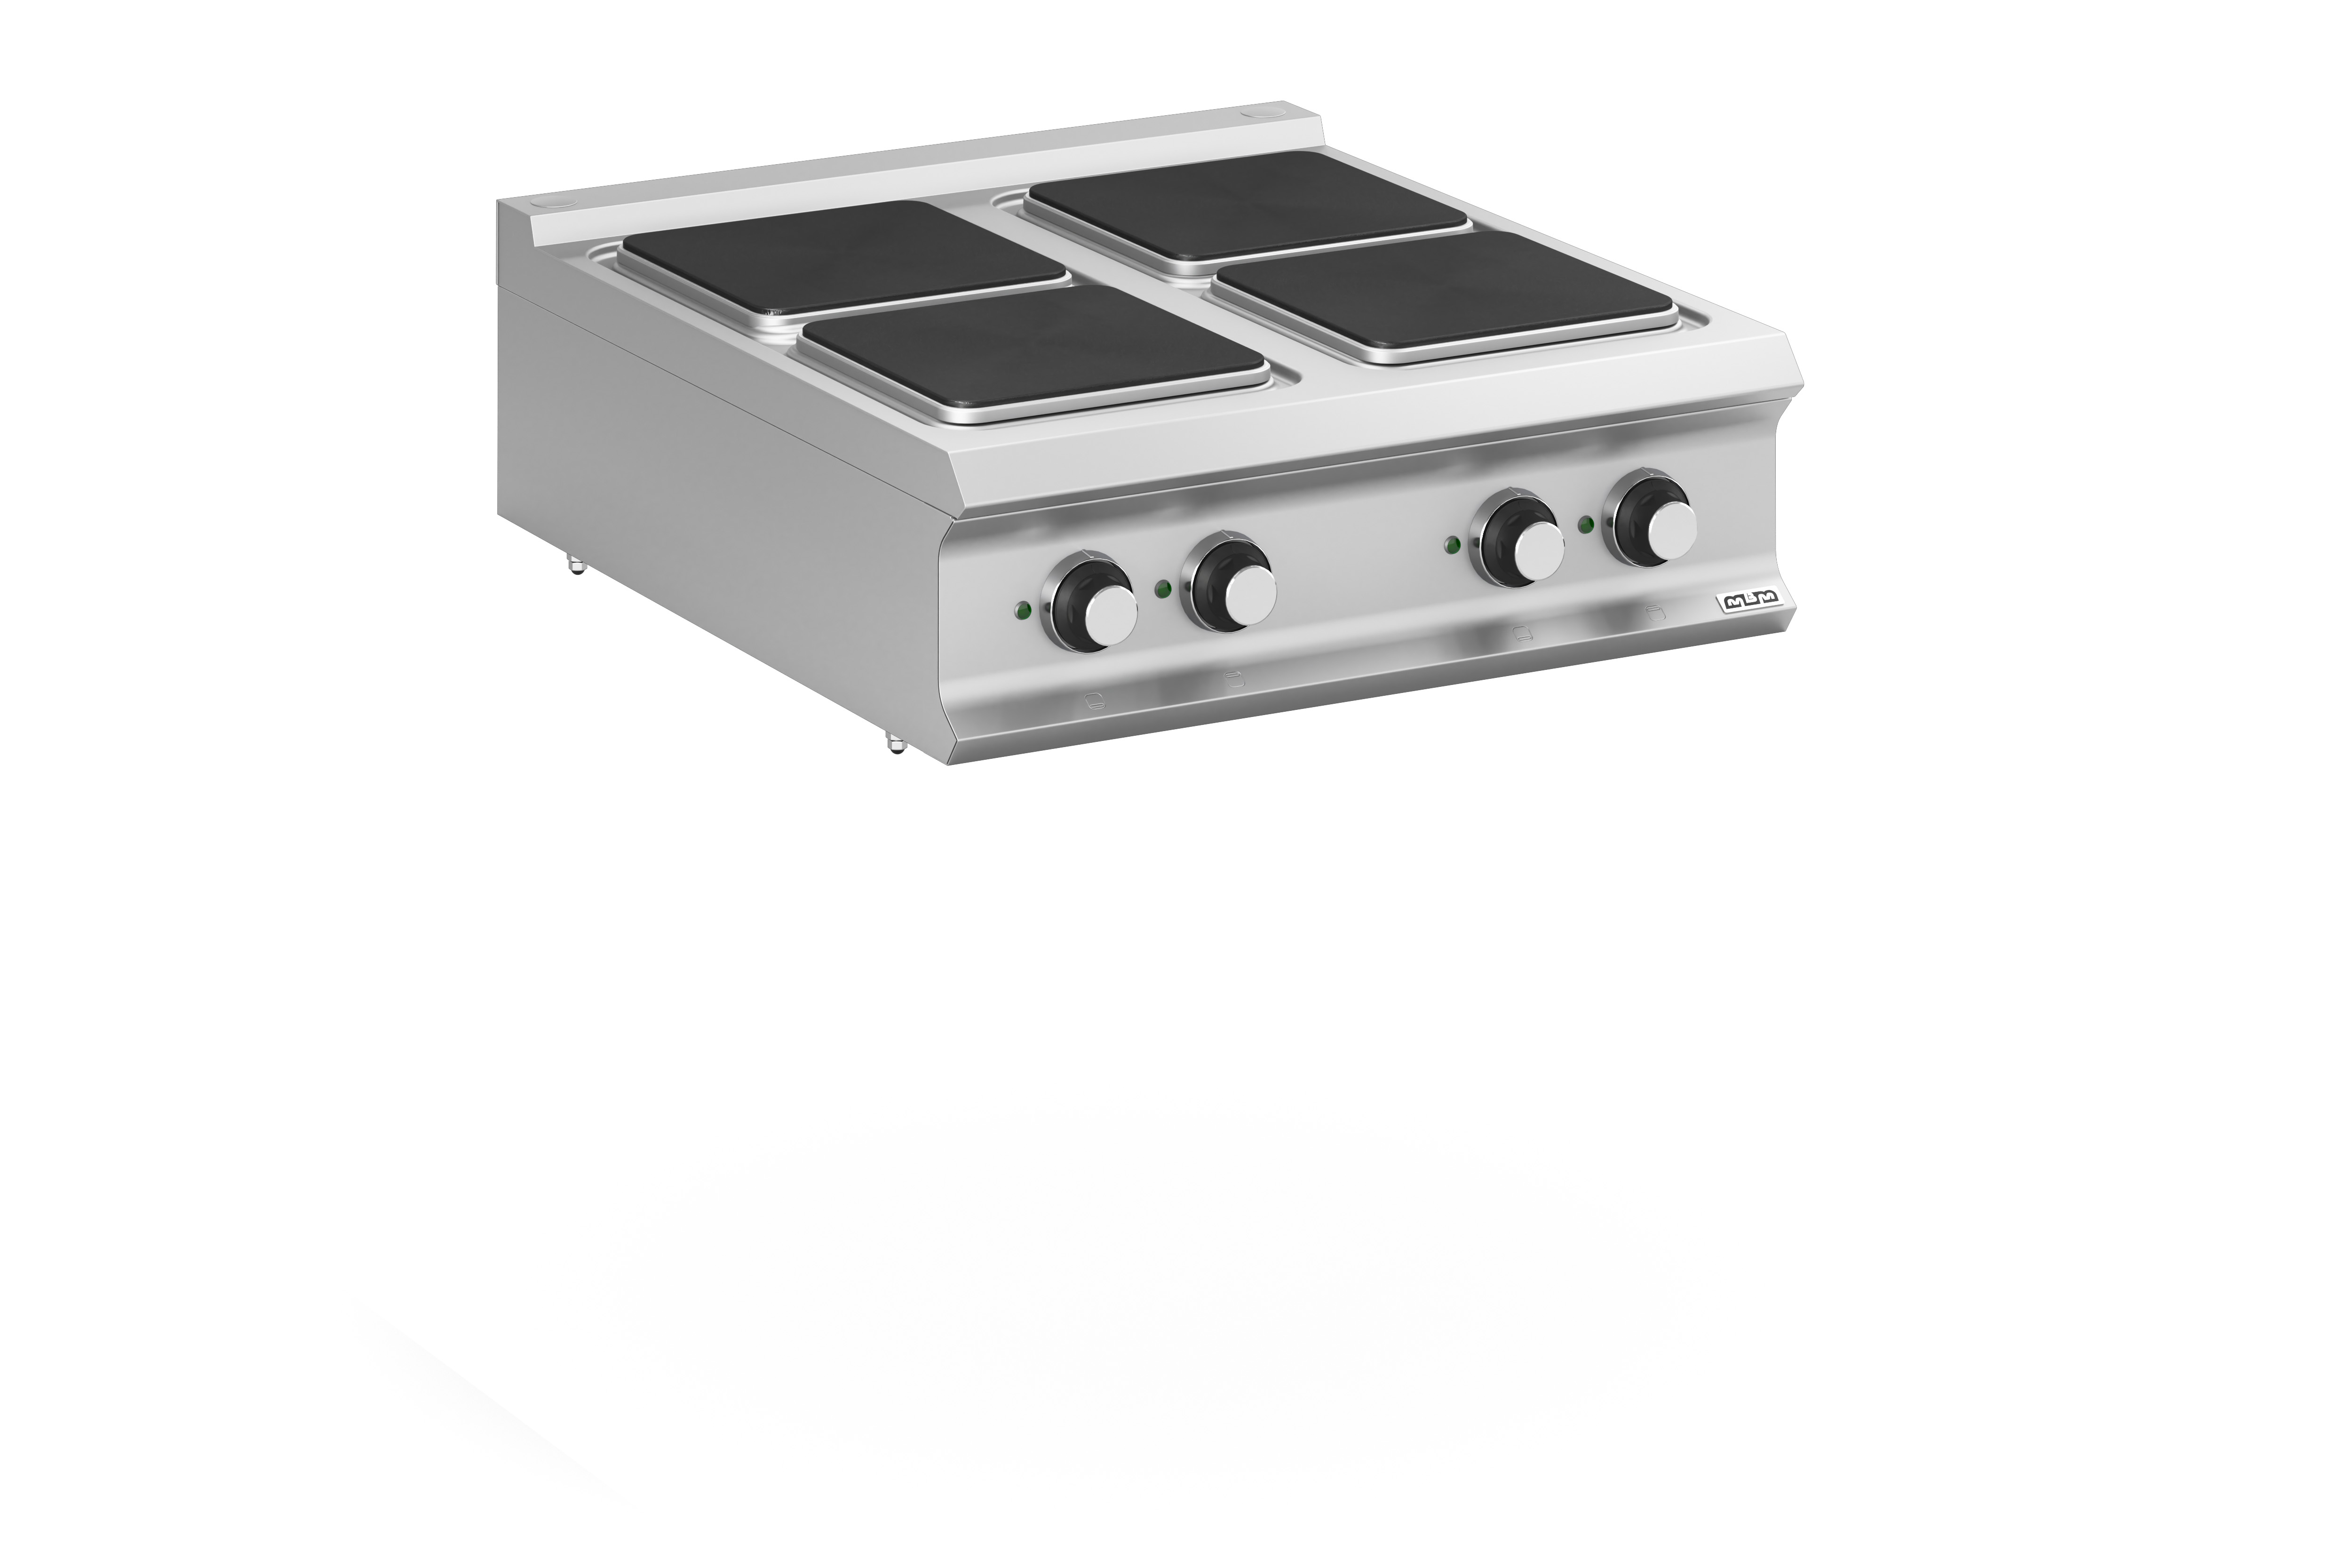 Domina Pro 900 PQ98T 4 Plates Countertop Electric Cooker